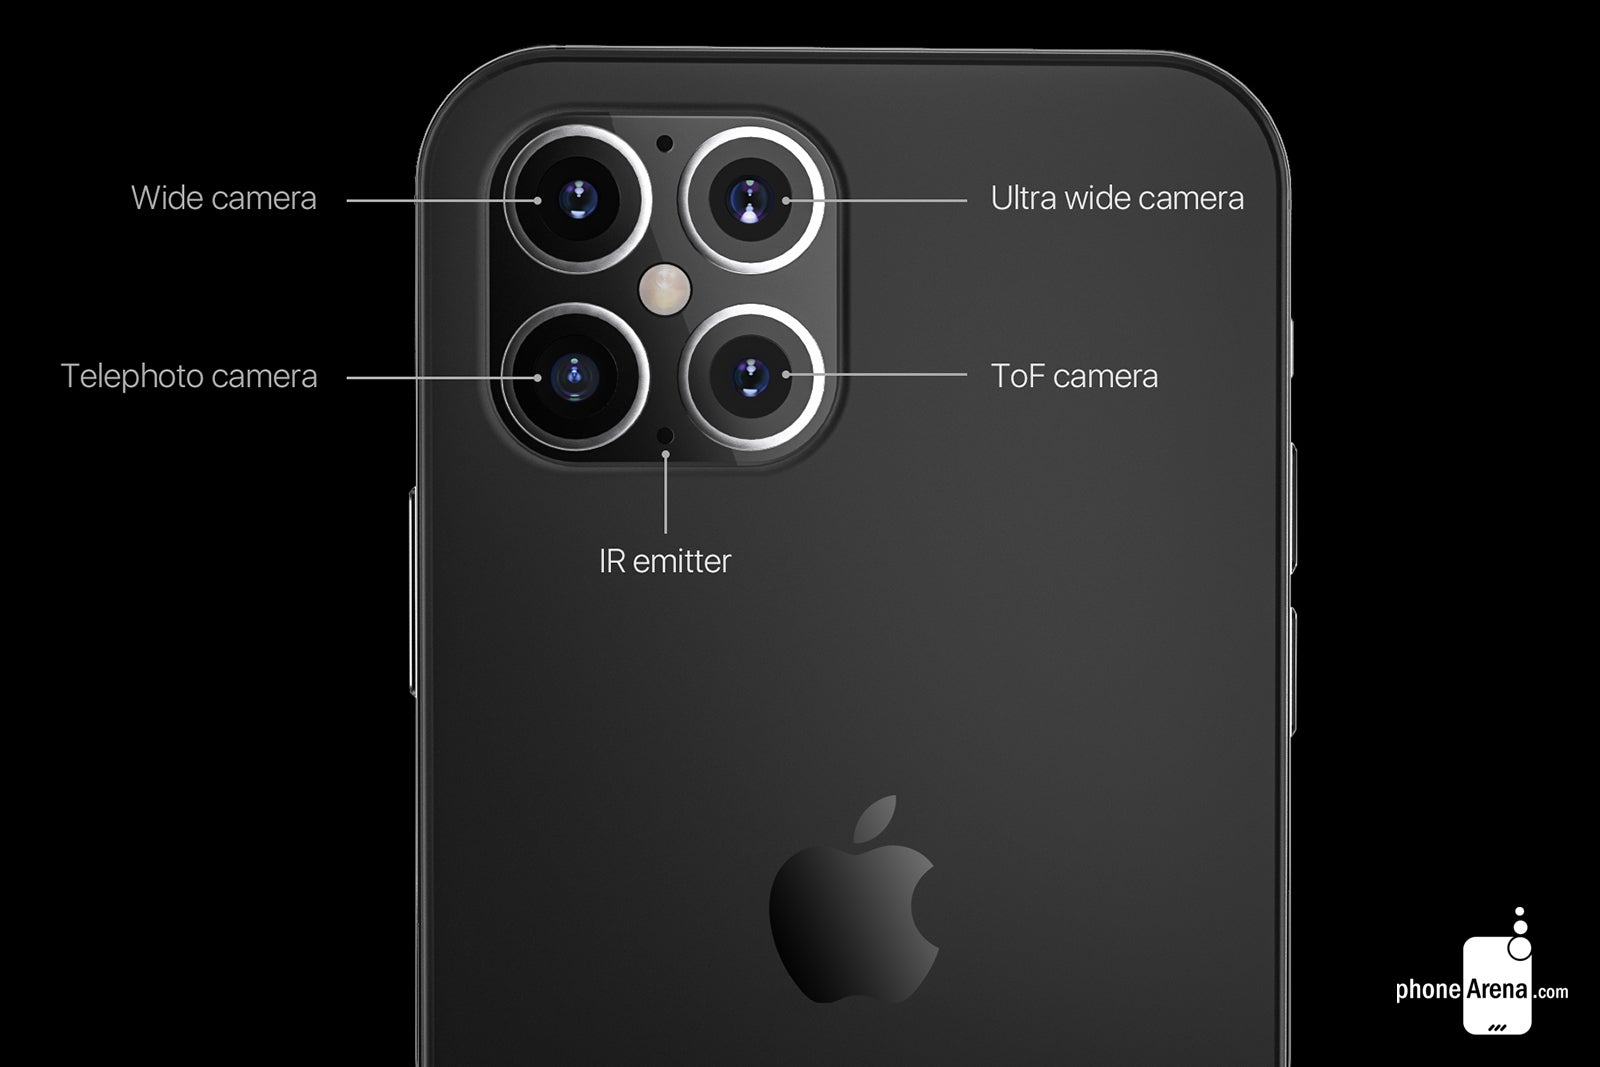 This render shows the expected quad-camera system on the iPhone 12 Pro Max - Despite supply chain hiccups, Apple still expects to release its first 5G iPhone models this fall